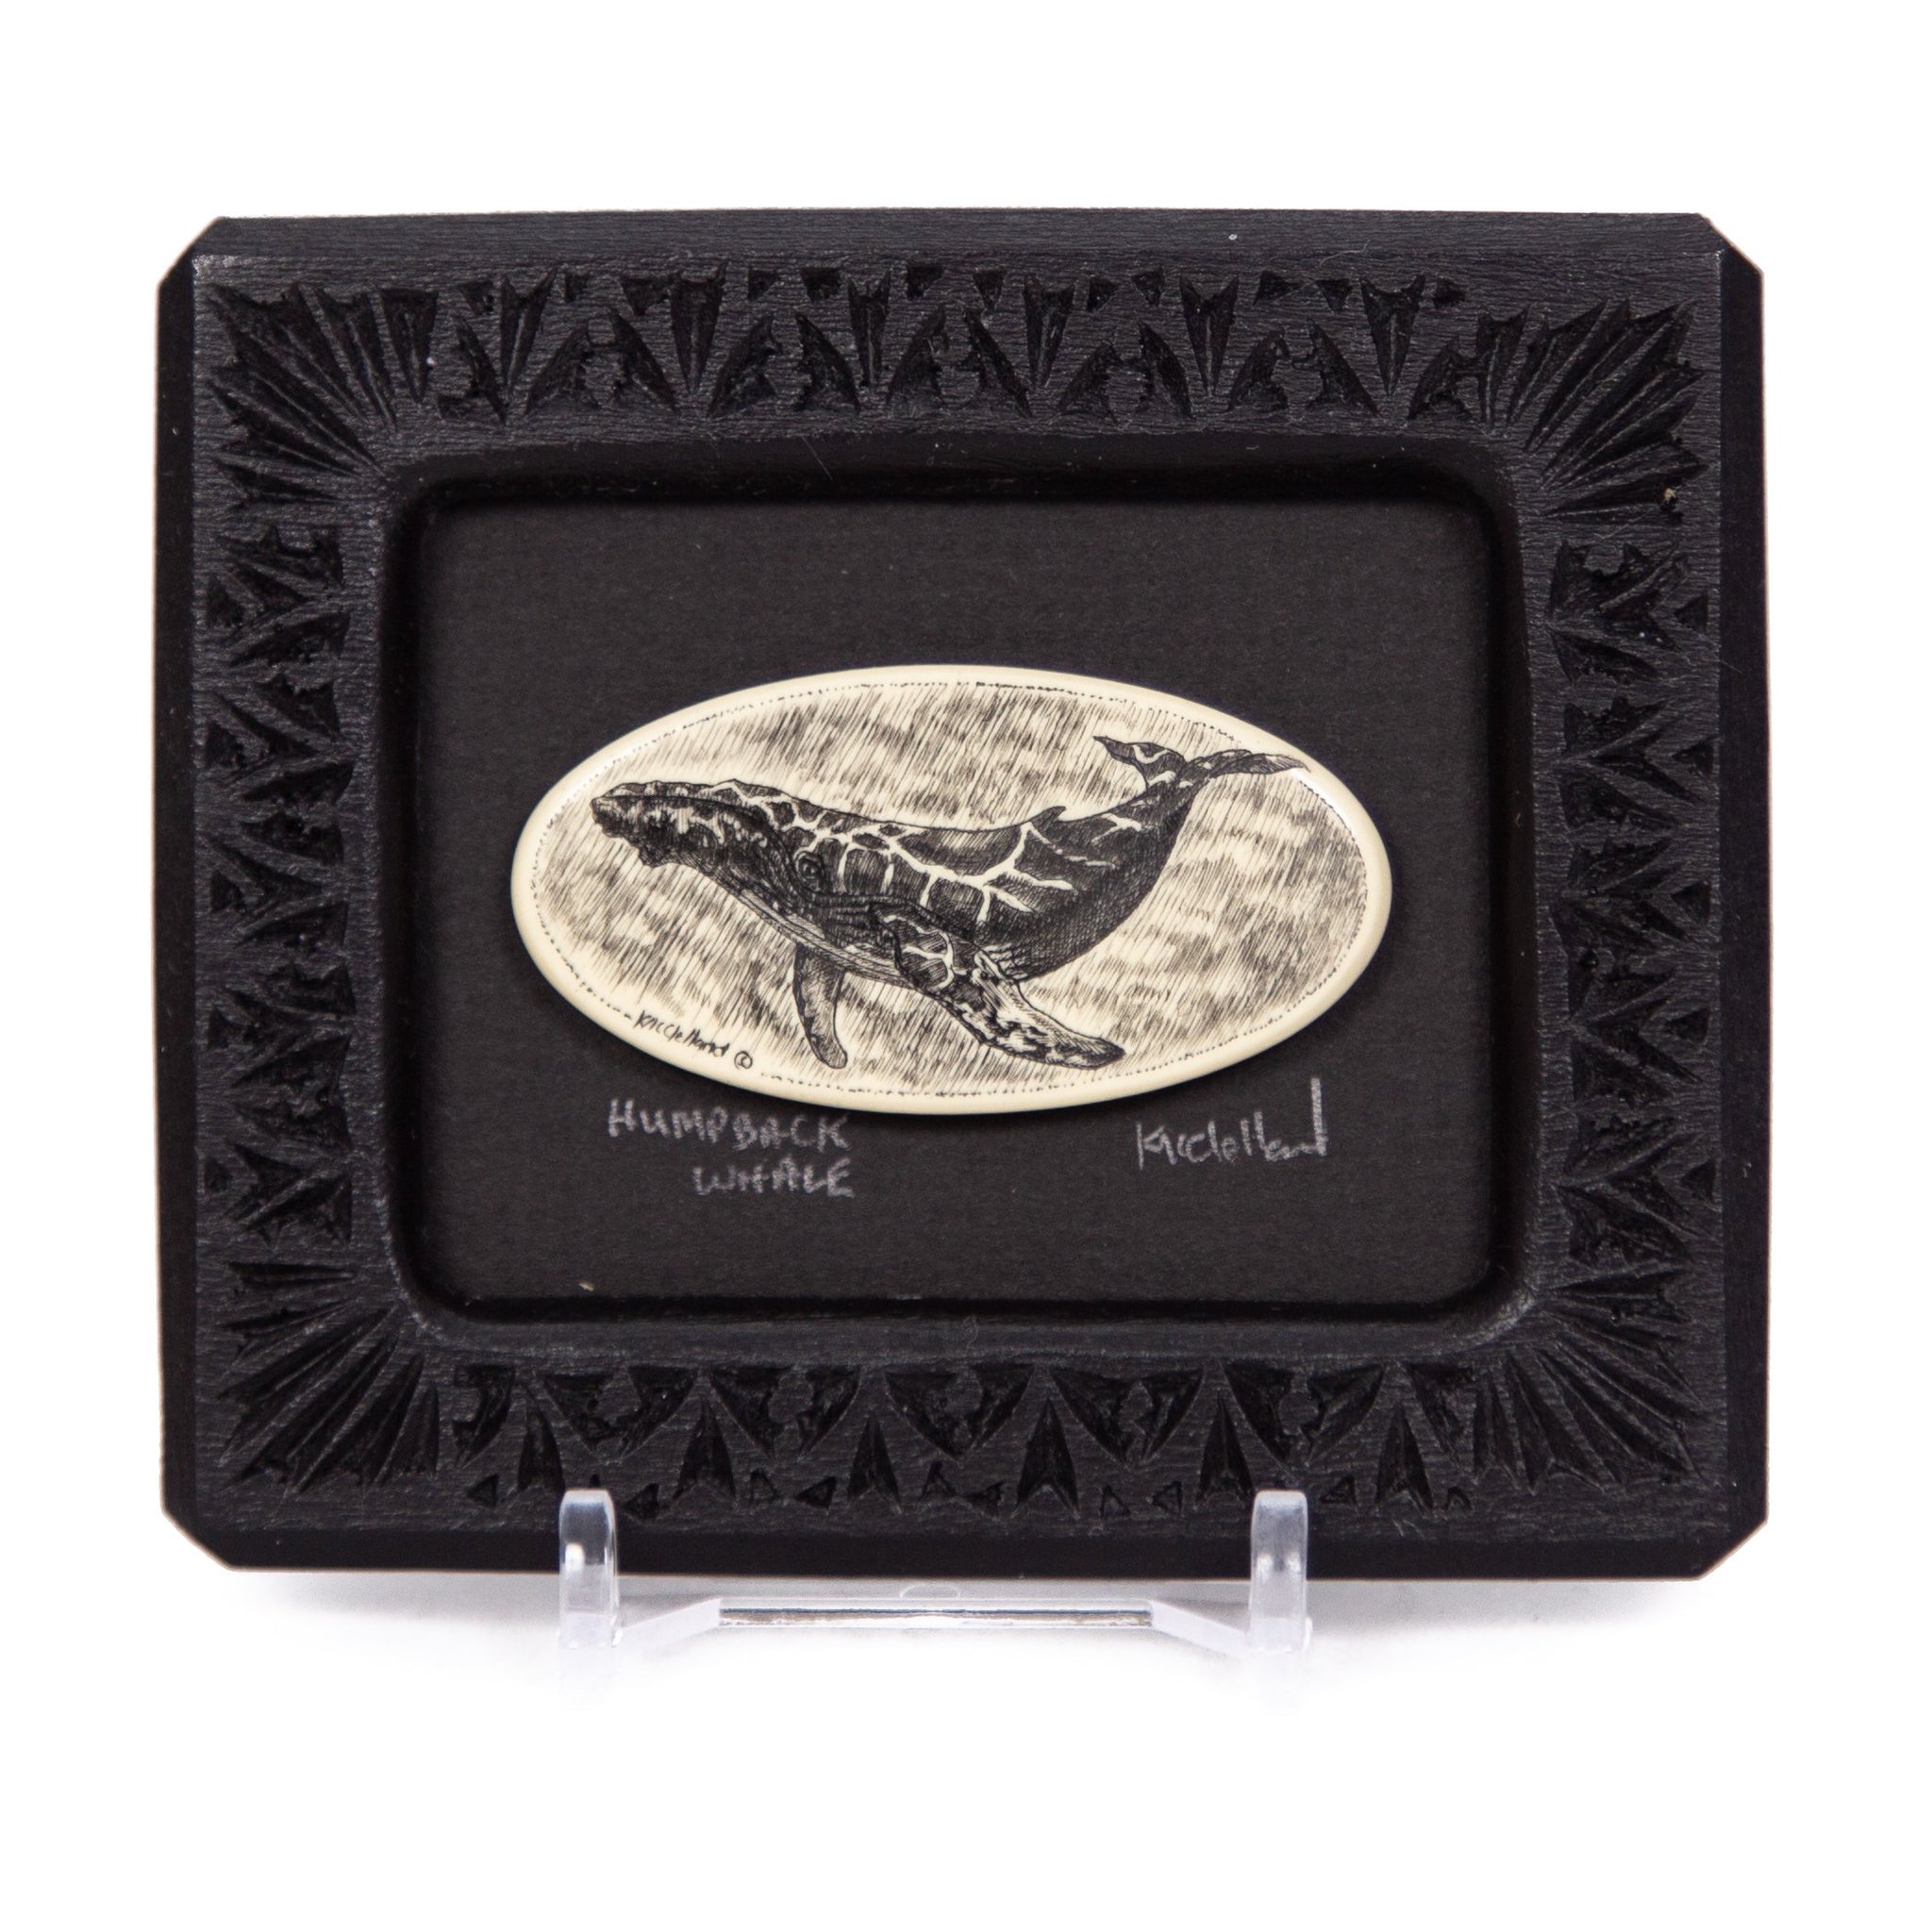 "Humpback Whale" Small Chip Carved Frame